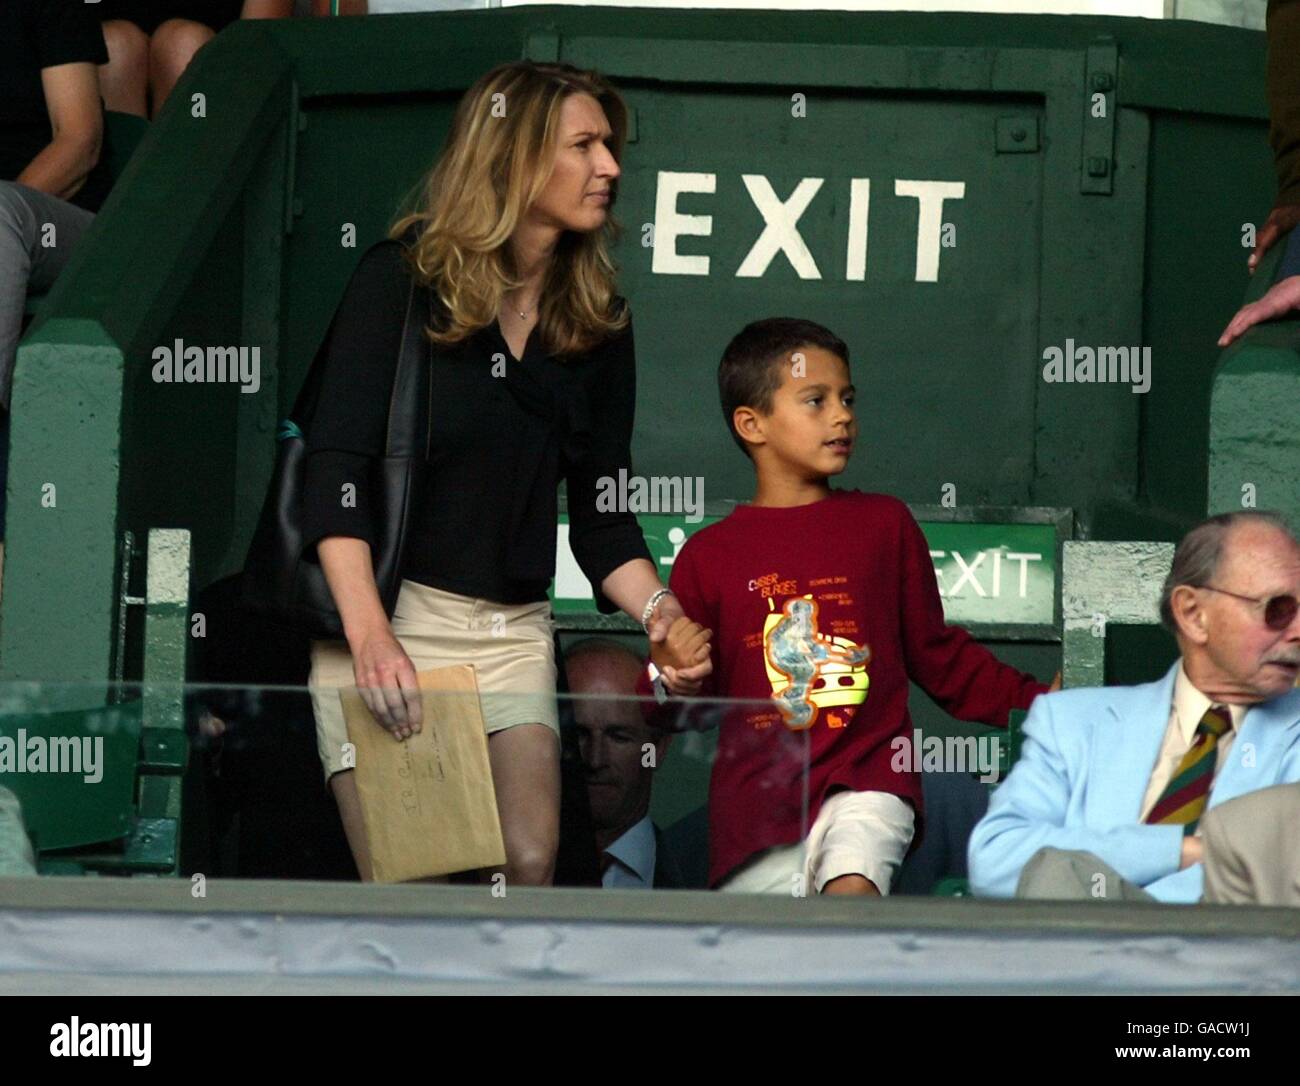 Tennis - Wimbledon 2002 - Second Round. Steffi Graf arrives with a young friend to watch her husband Andre Agassi play Stock Photo